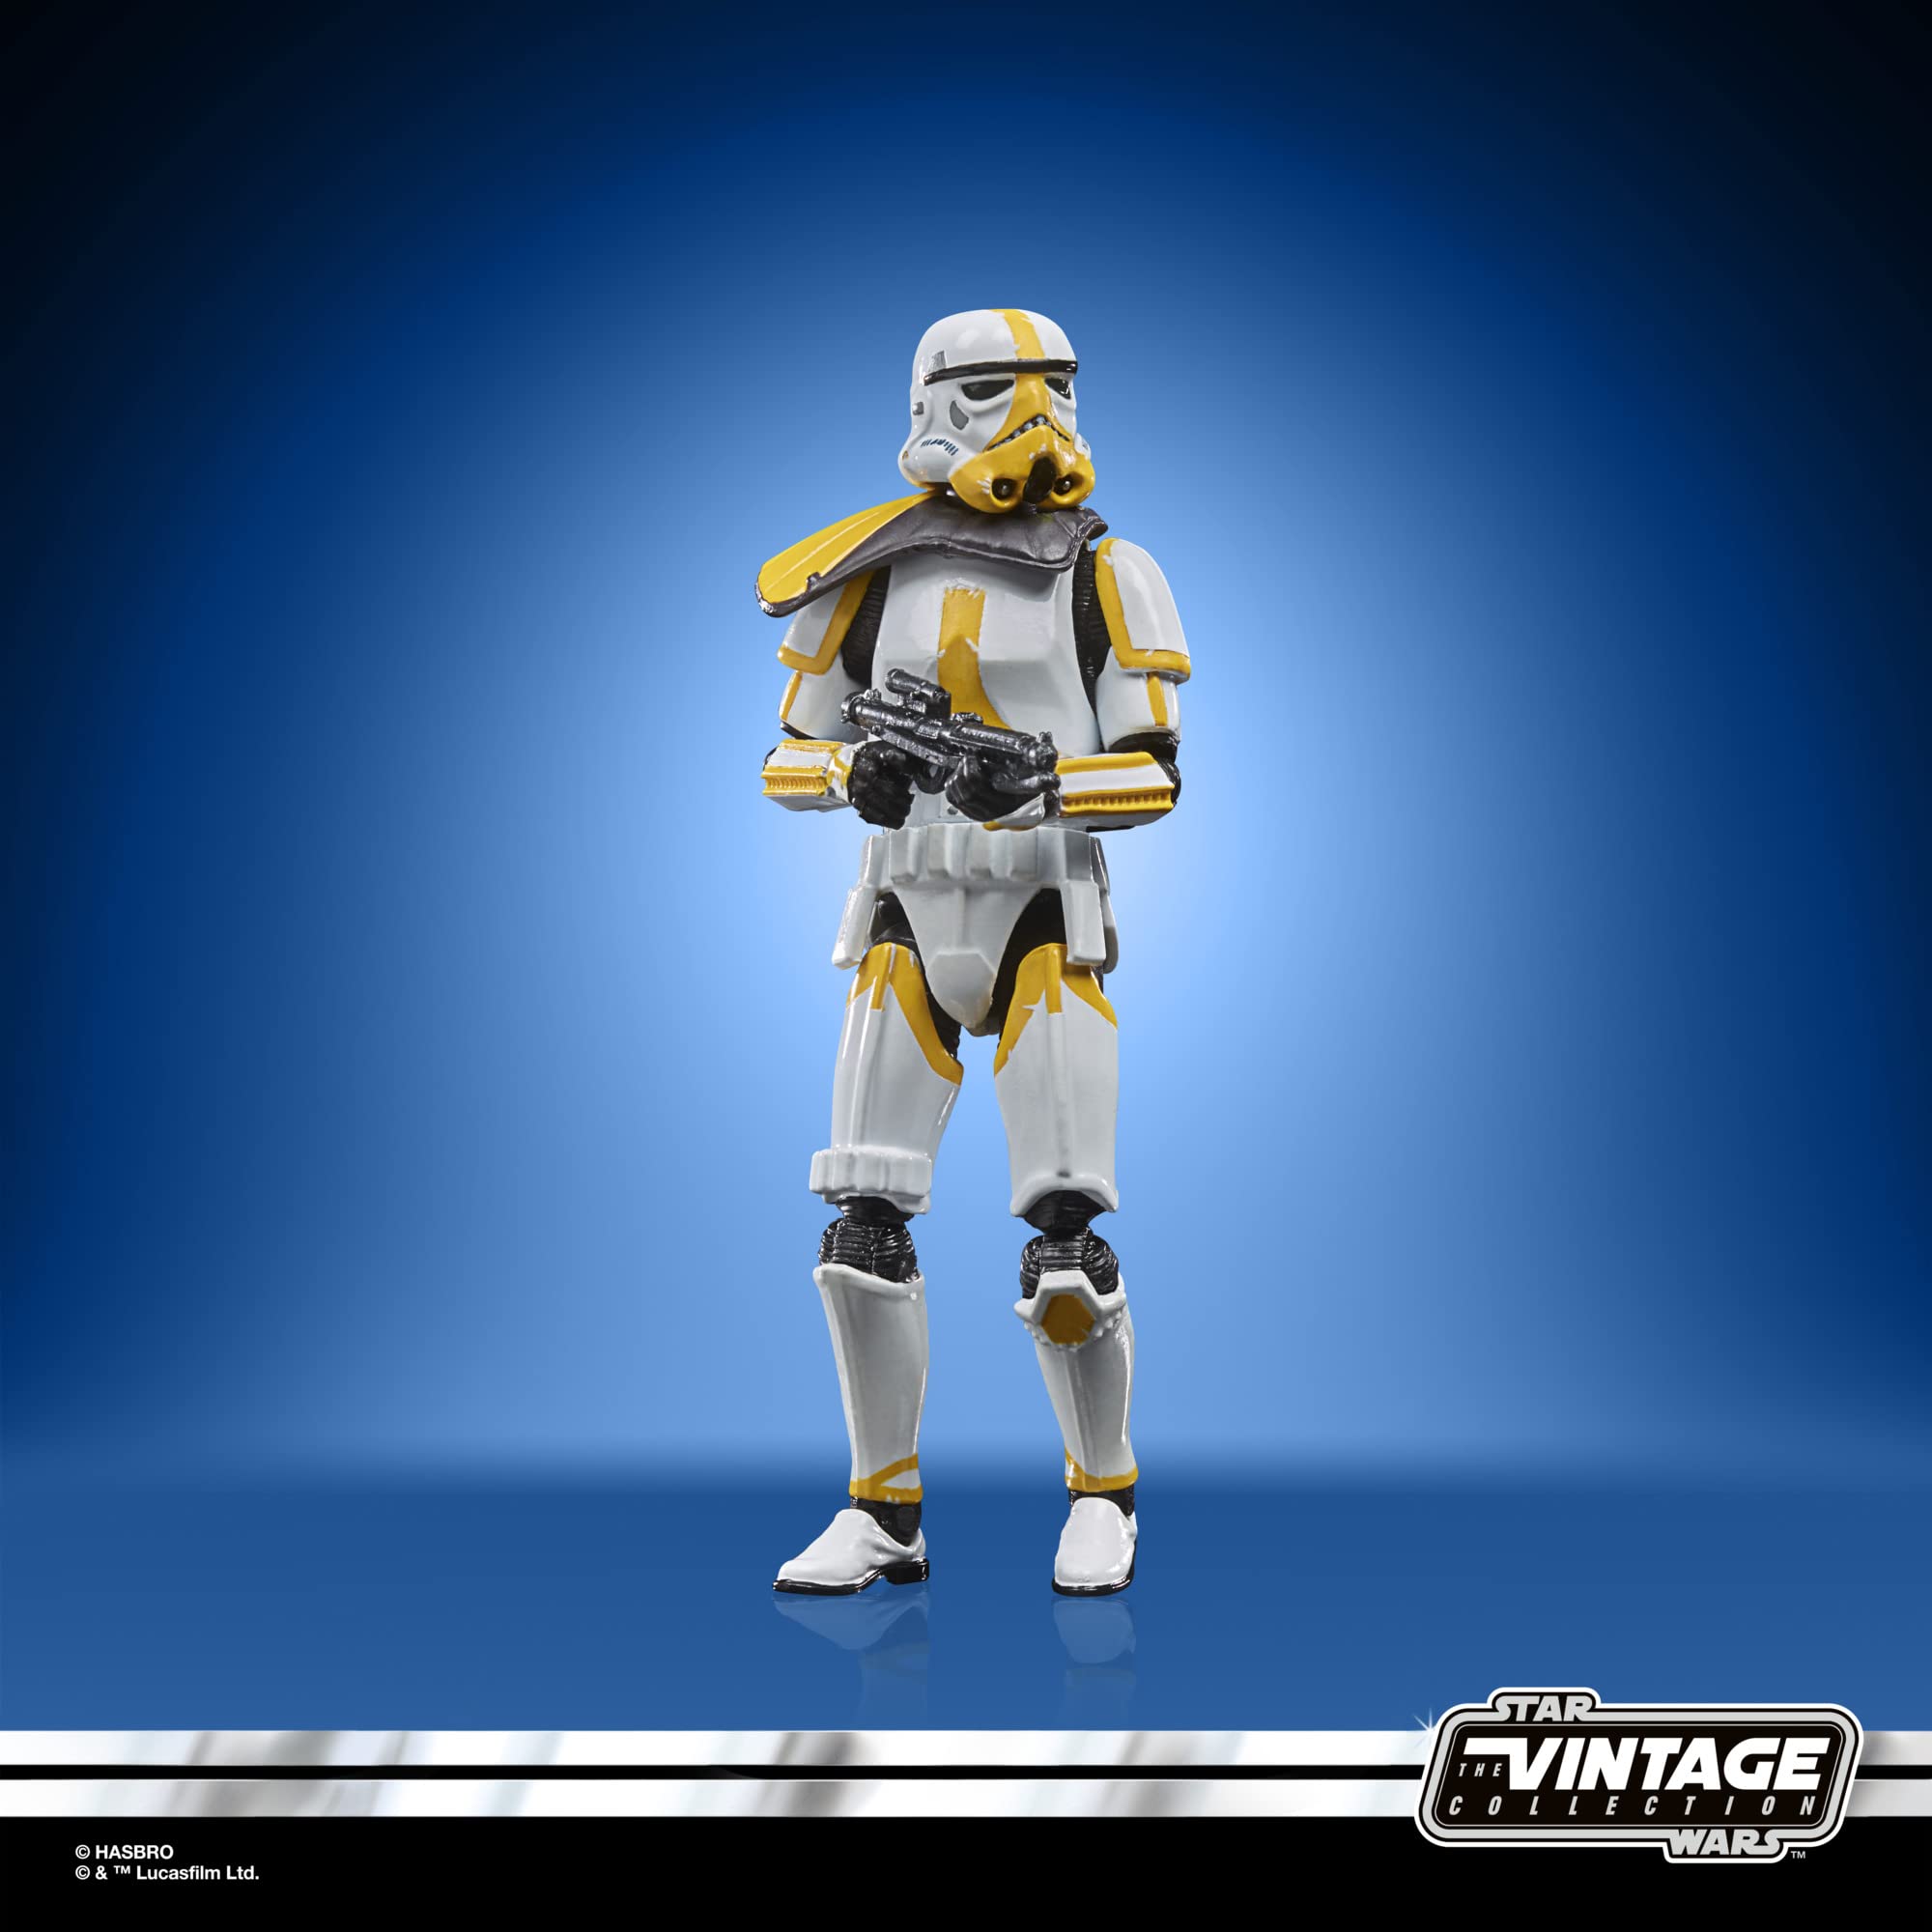 STAR WARS The Vintage Collection Artillery Stormtrooper Toy, 3.75-Inch-Scale The Mandalorian Action Figure, Toys for Kids Ages 4 and Up